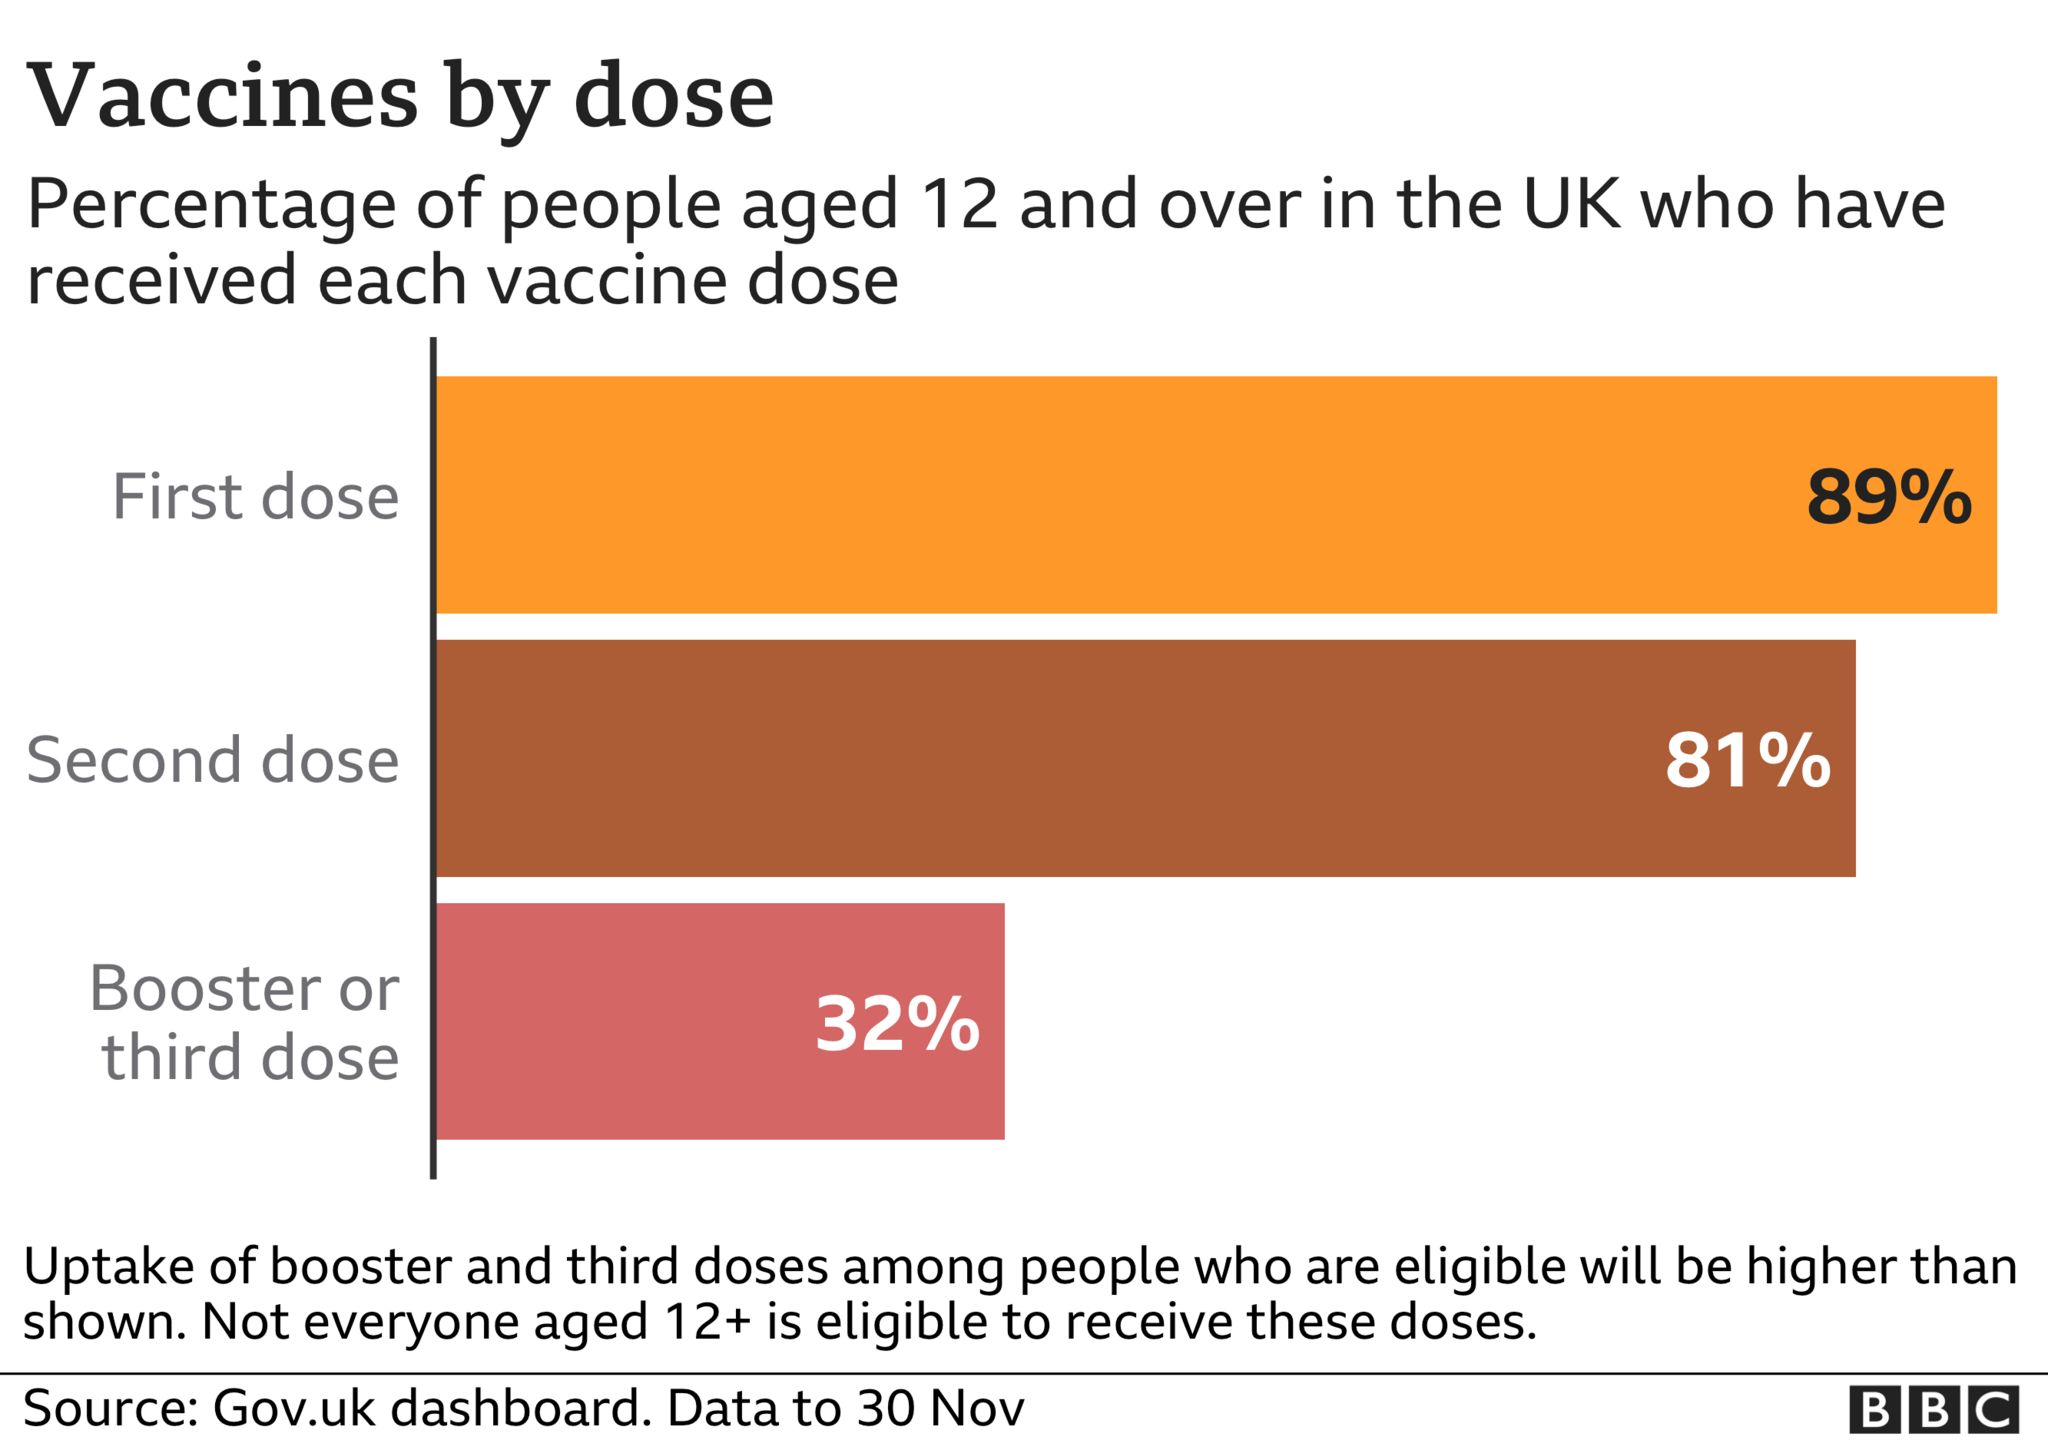 Chart showing vaccination rates by dose